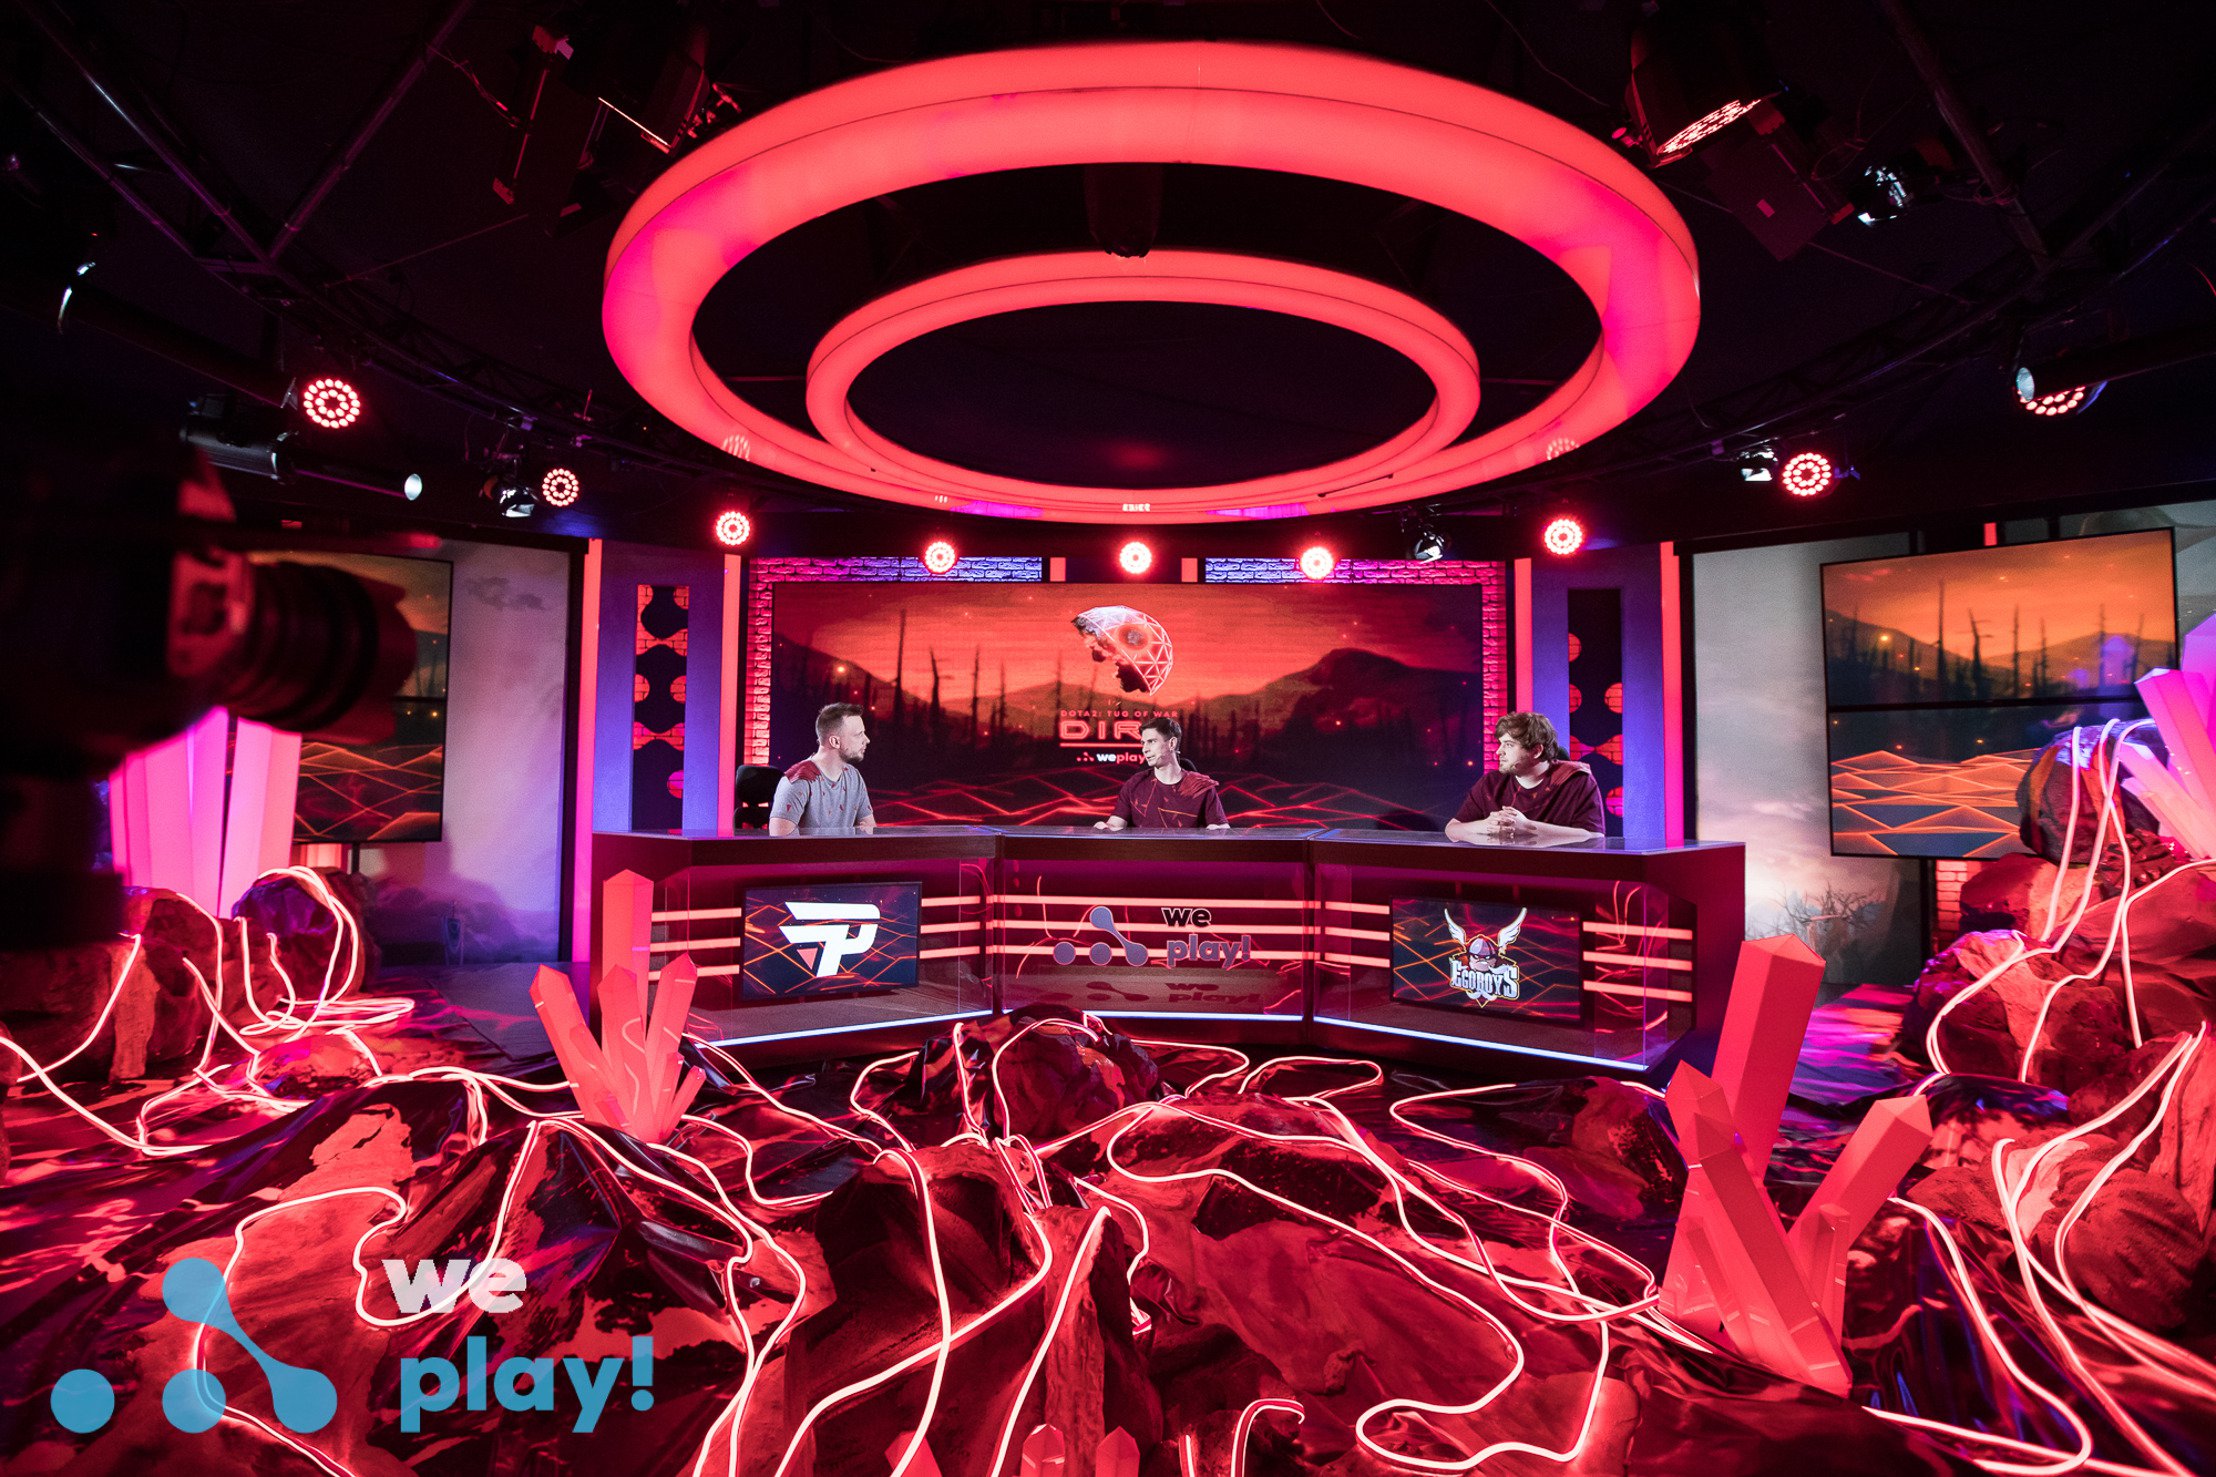 WePlay! Tug of War: Dire — photos of WePlay! Esports studio and talents